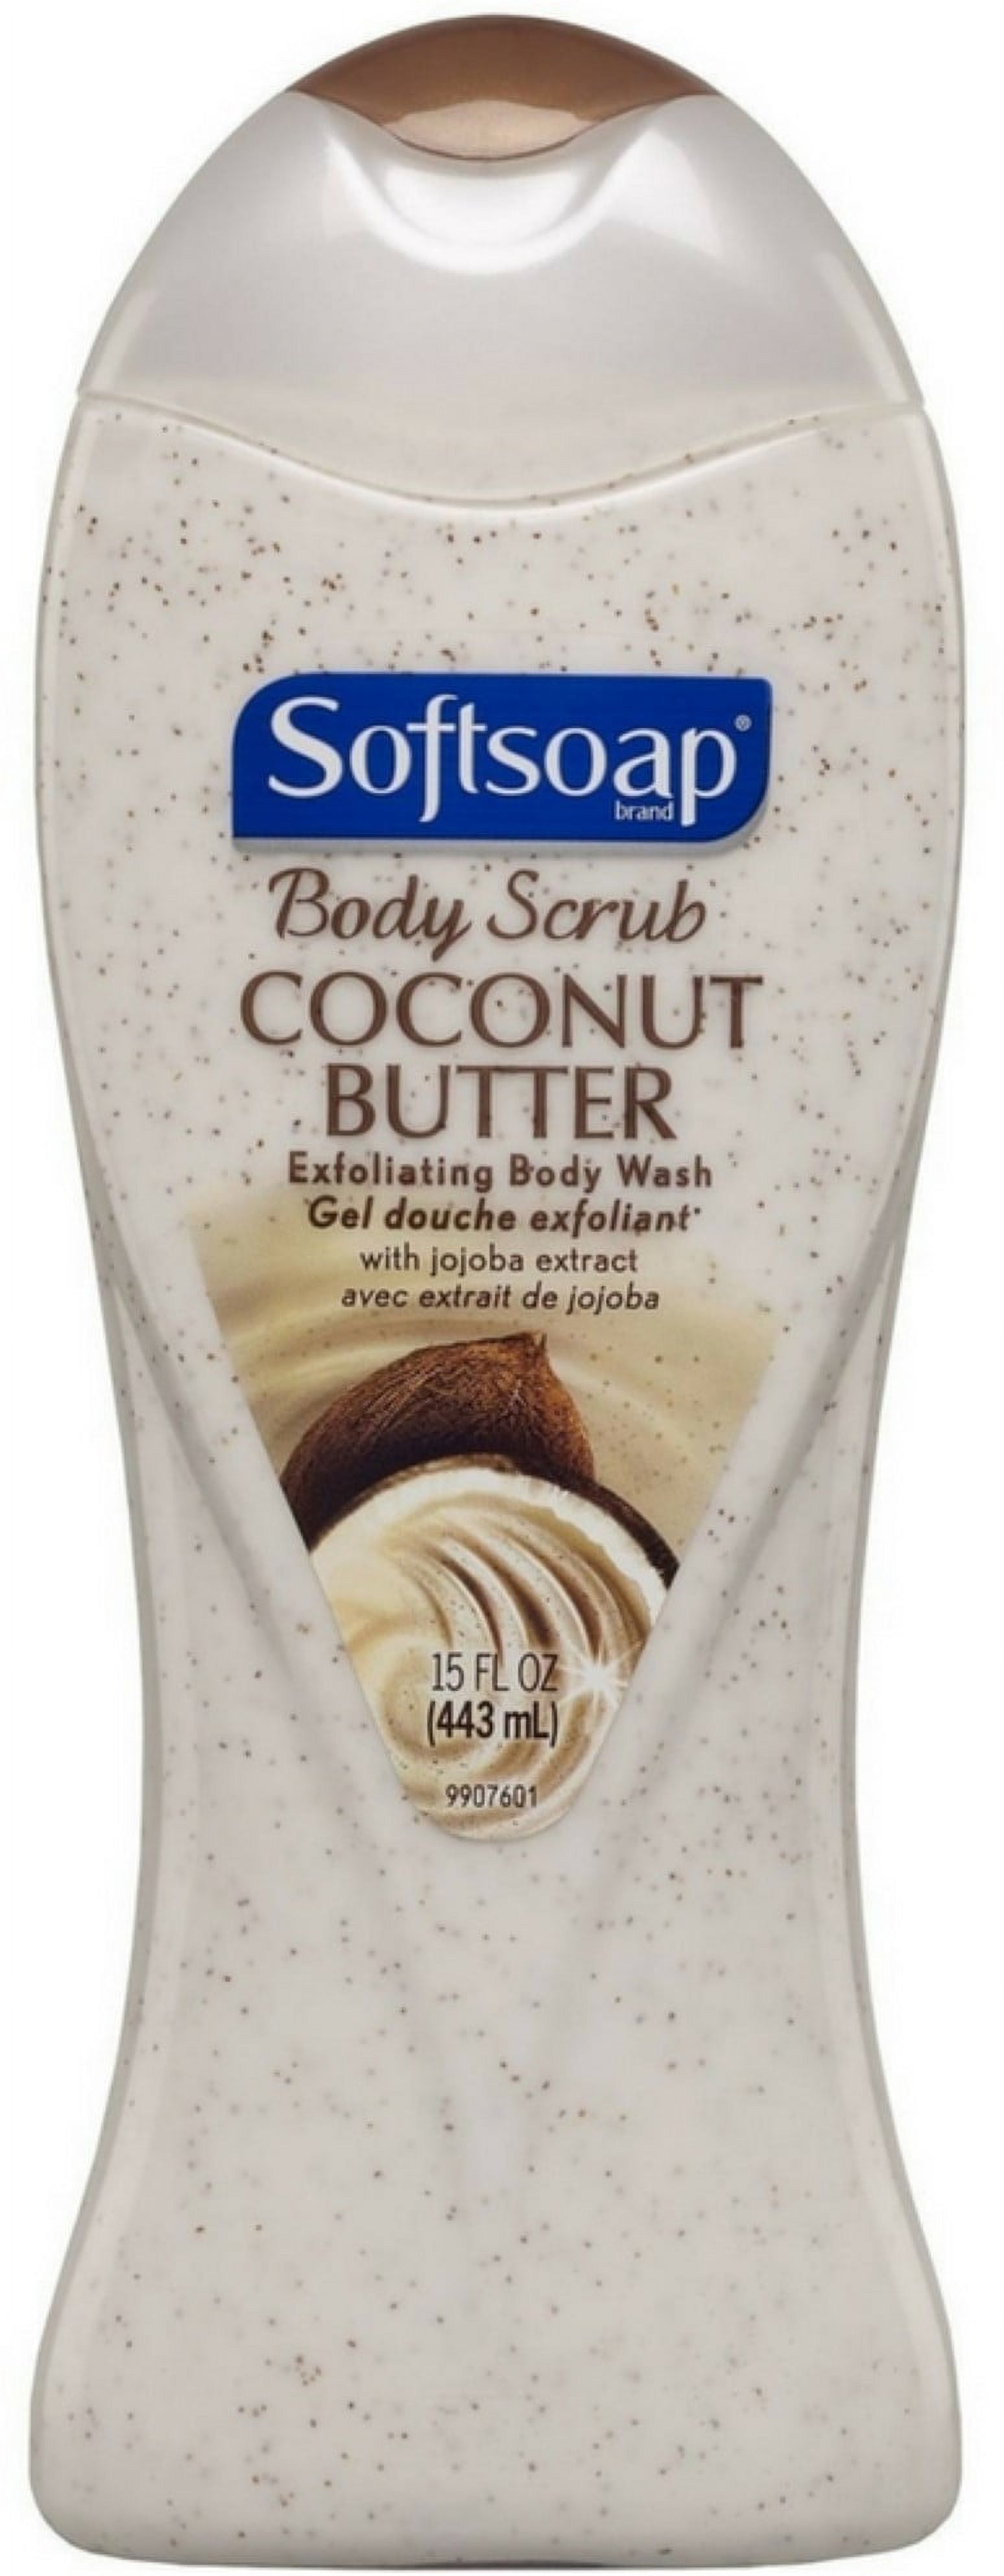 Softsoap, Coconut Butter, Exfoliating Body Wash, 15 Ounce - image 1 of 4